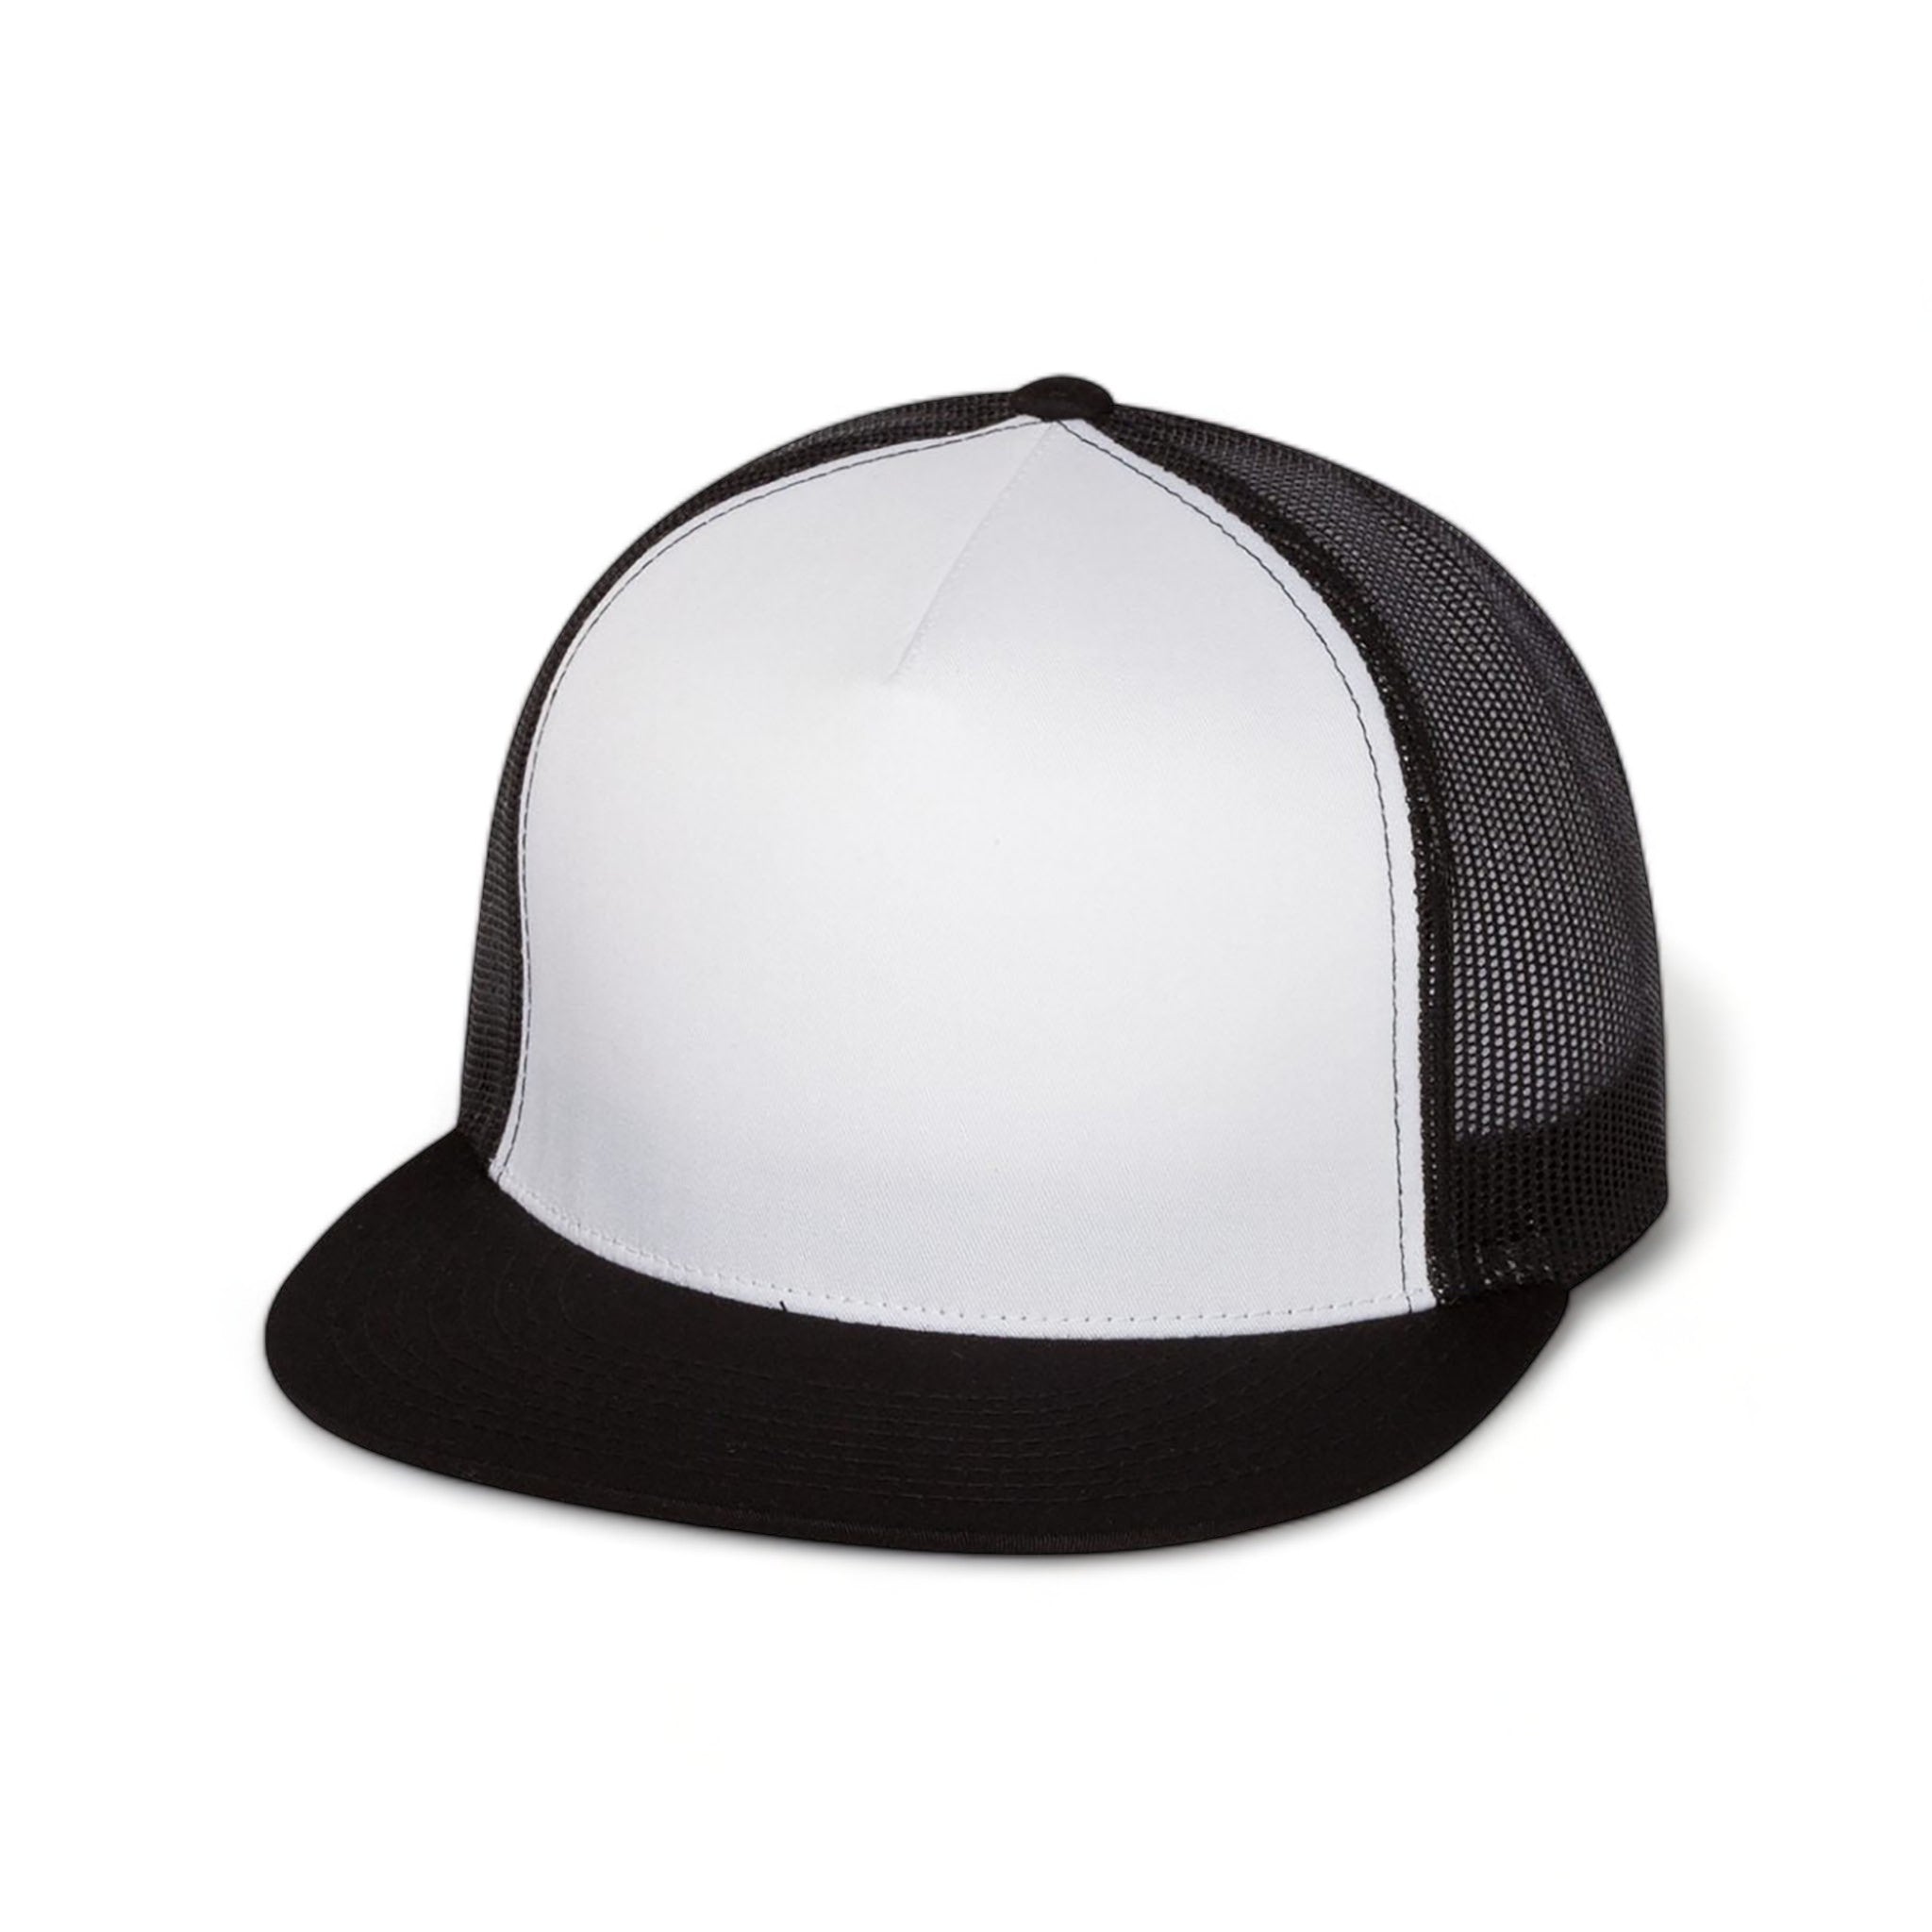 Front view of YP Classics 6006 custom hat in black, white and black